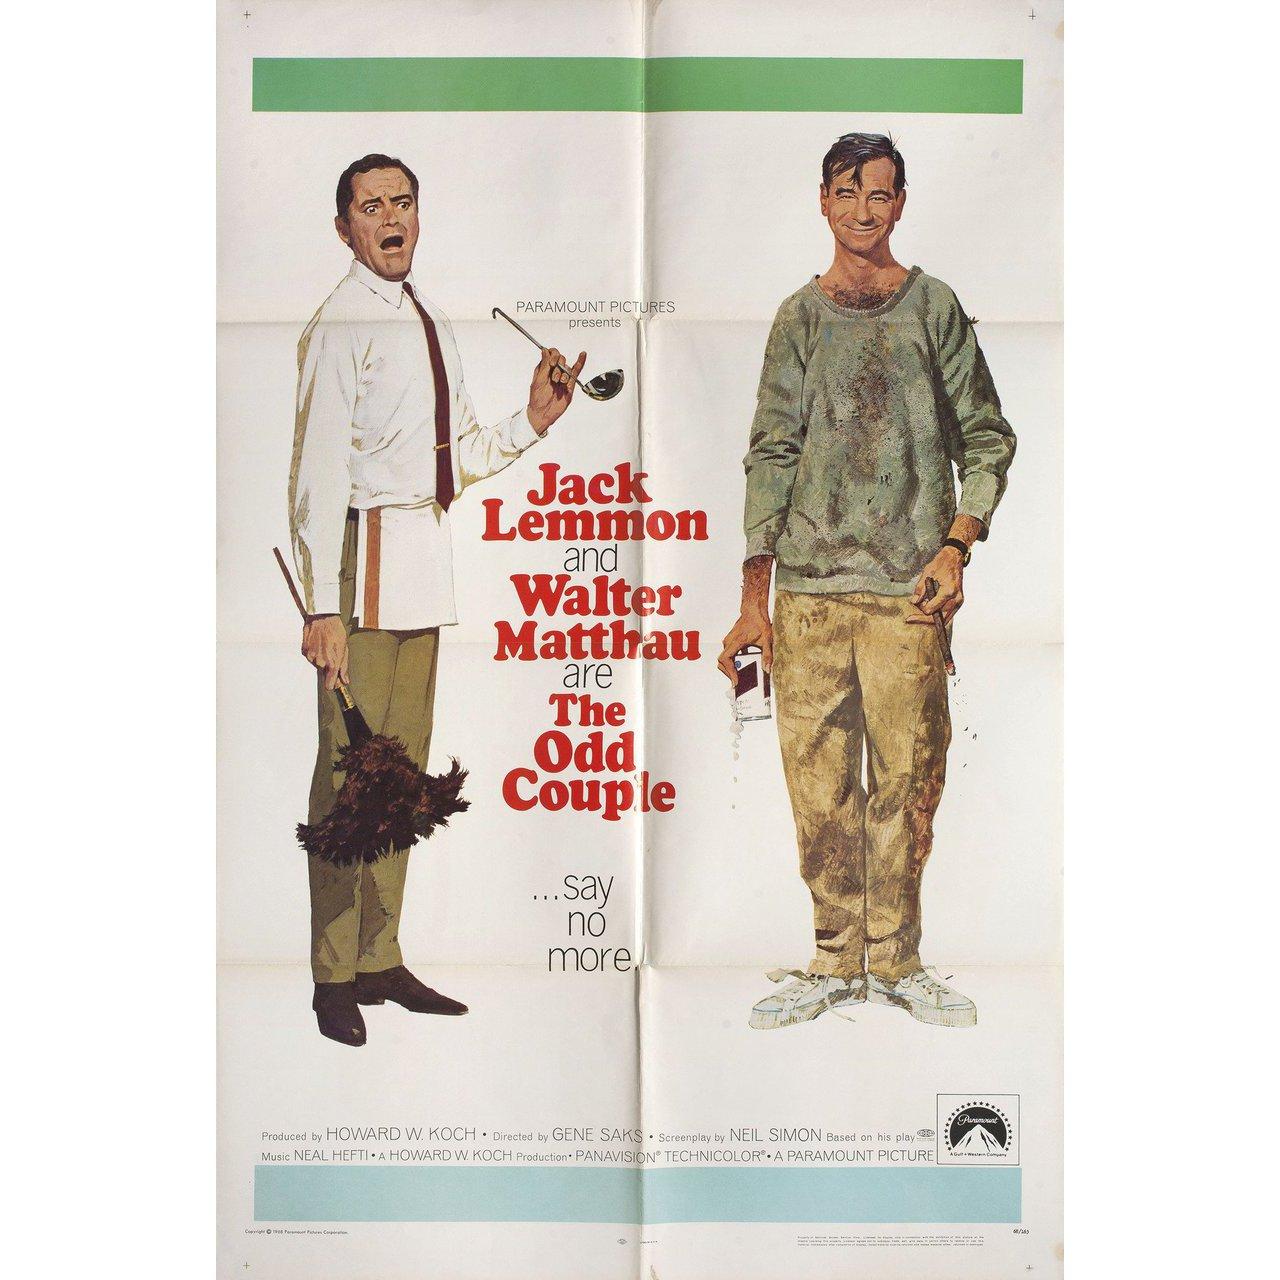 Original 1968 U.S. one sheet poster by Robert McGinnis for the film The Odd Couple directed by Gene Saks with Jack Lemmon / Walter Matthau / John Fiedler / Herb Edelman. Very good-fine condition, folded. Many original posters were issued folded or